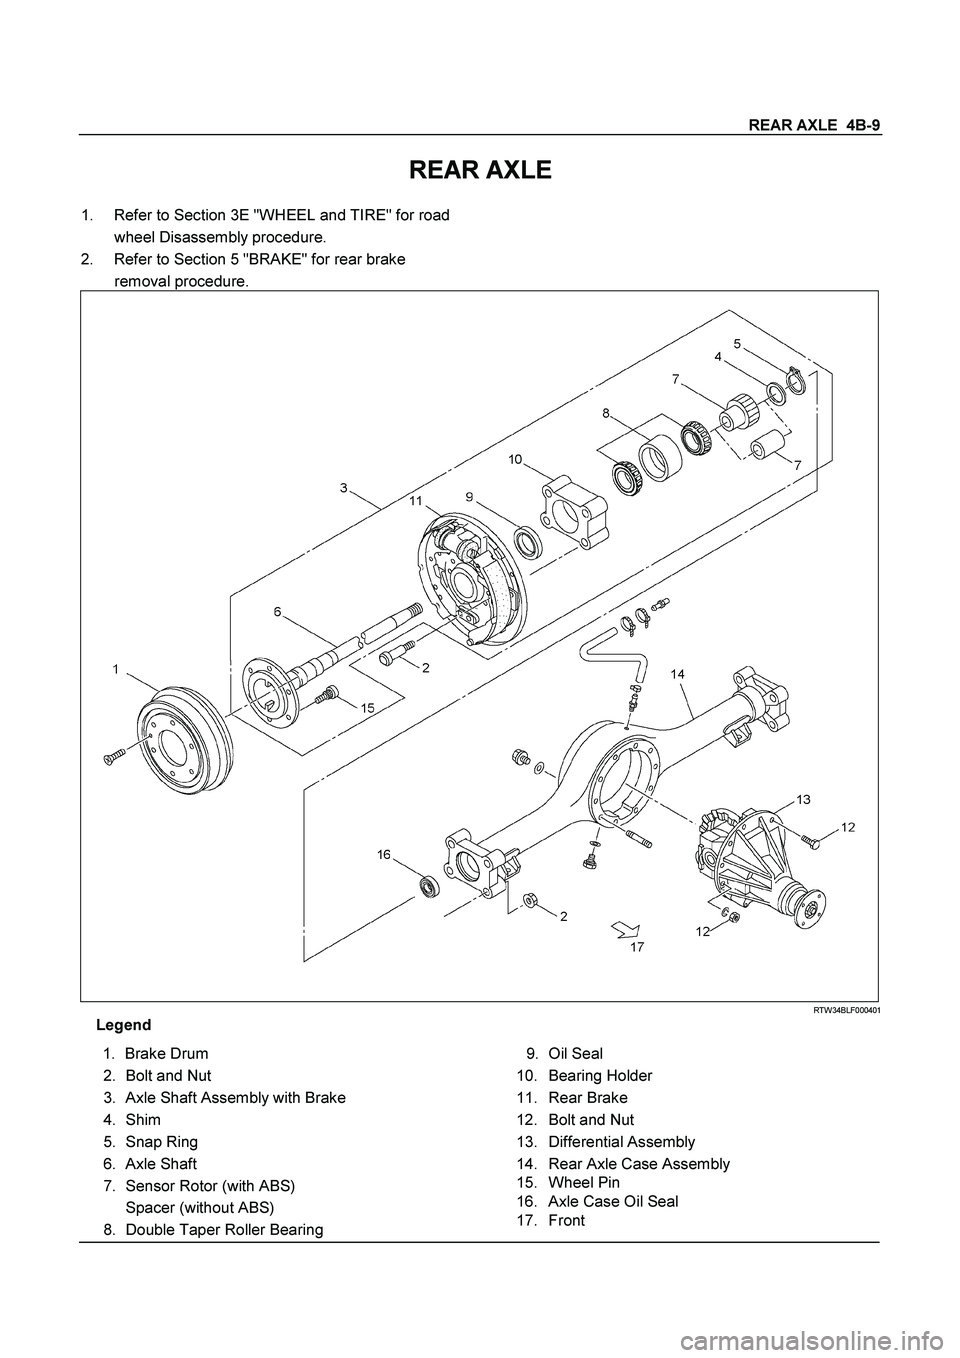 ISUZU TF SERIES 2004  Workshop Manual REAR AXLE  4B-9
 
REAR AXLE 
1. 
Refer to Section 3E "WHEEL and TIRE" for road 
wheel Disassembly procedure. 
2. 
Refer to Section 5 "BRAKE" for rear brake 
removal procedure.   
  
 
 RTW34BLF000401 